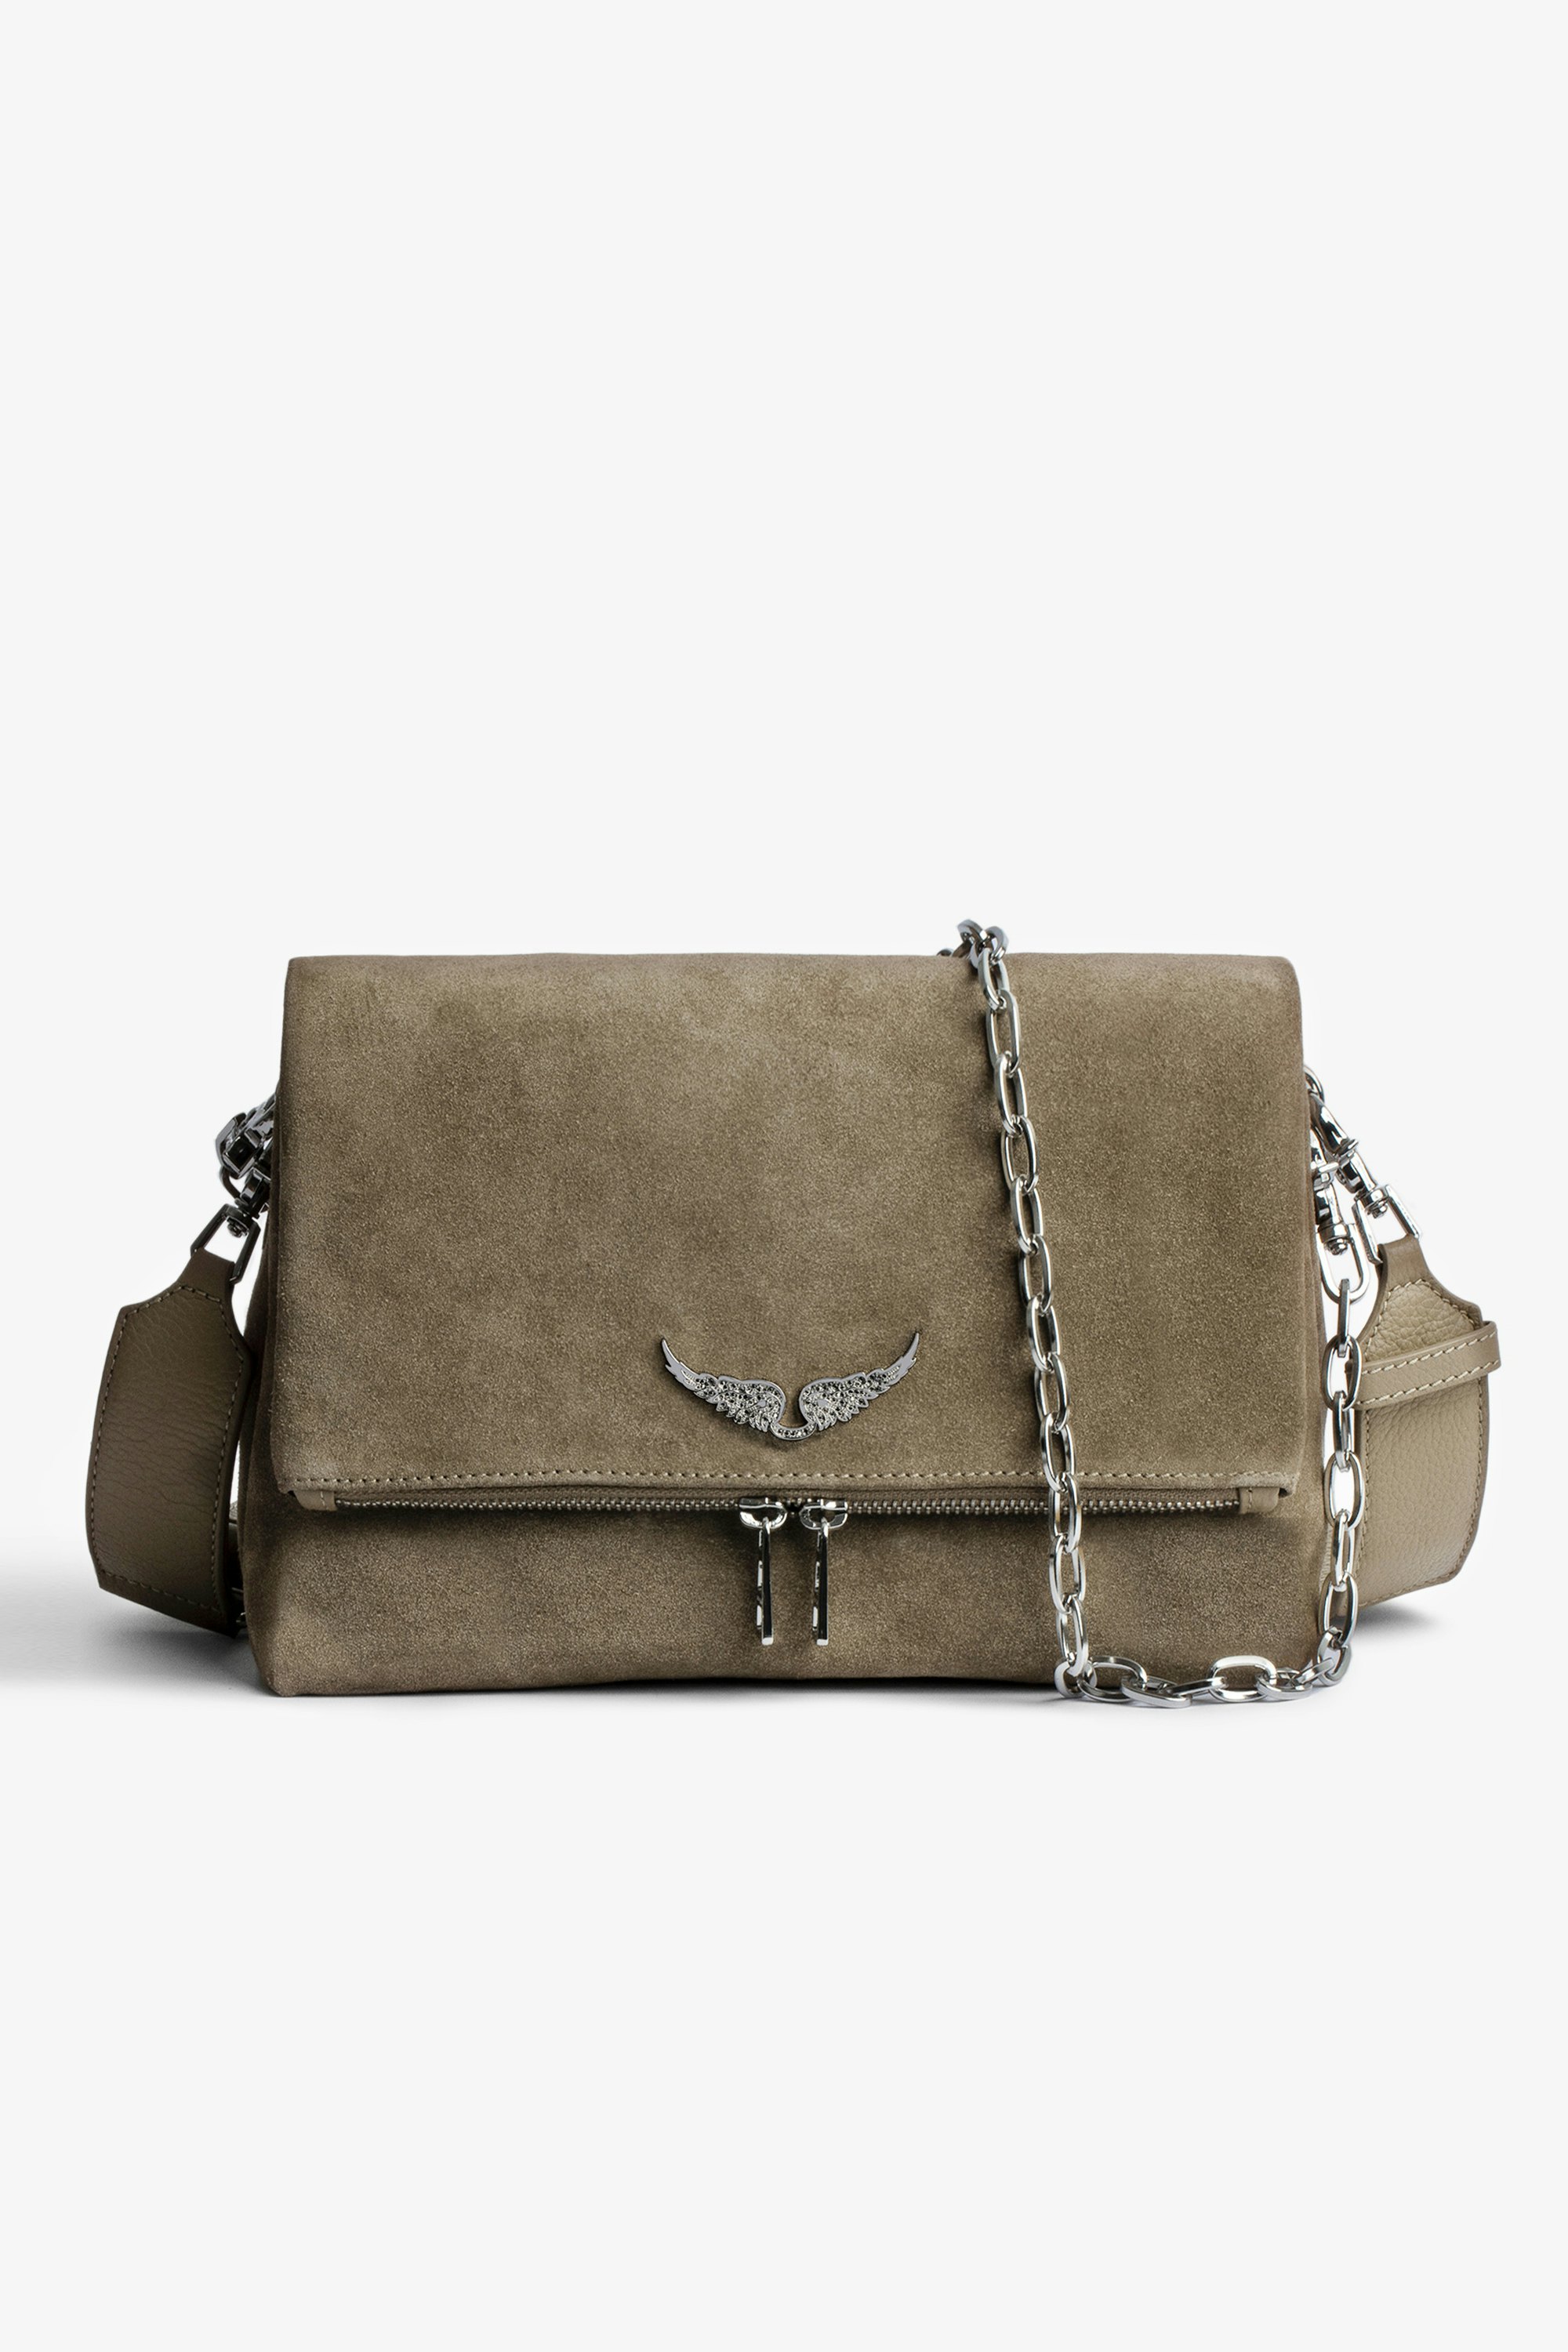 Rocky Suede Bag Women’s taupe suede bag with silver-tone metal shoulder strap